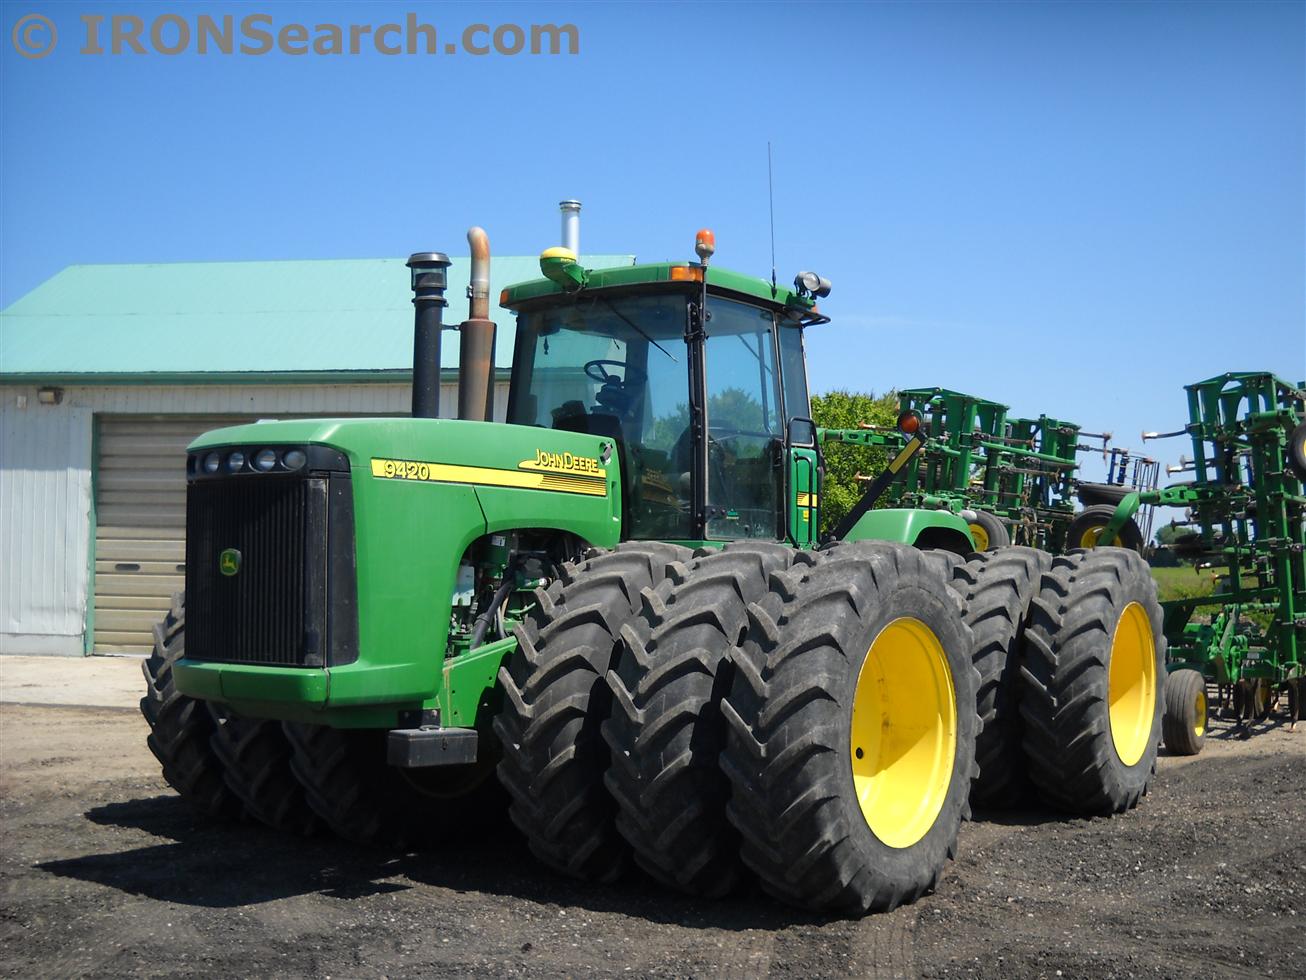 IRON Search - 2005 John Deere 9420 Tractor For Sale By Advantage ...